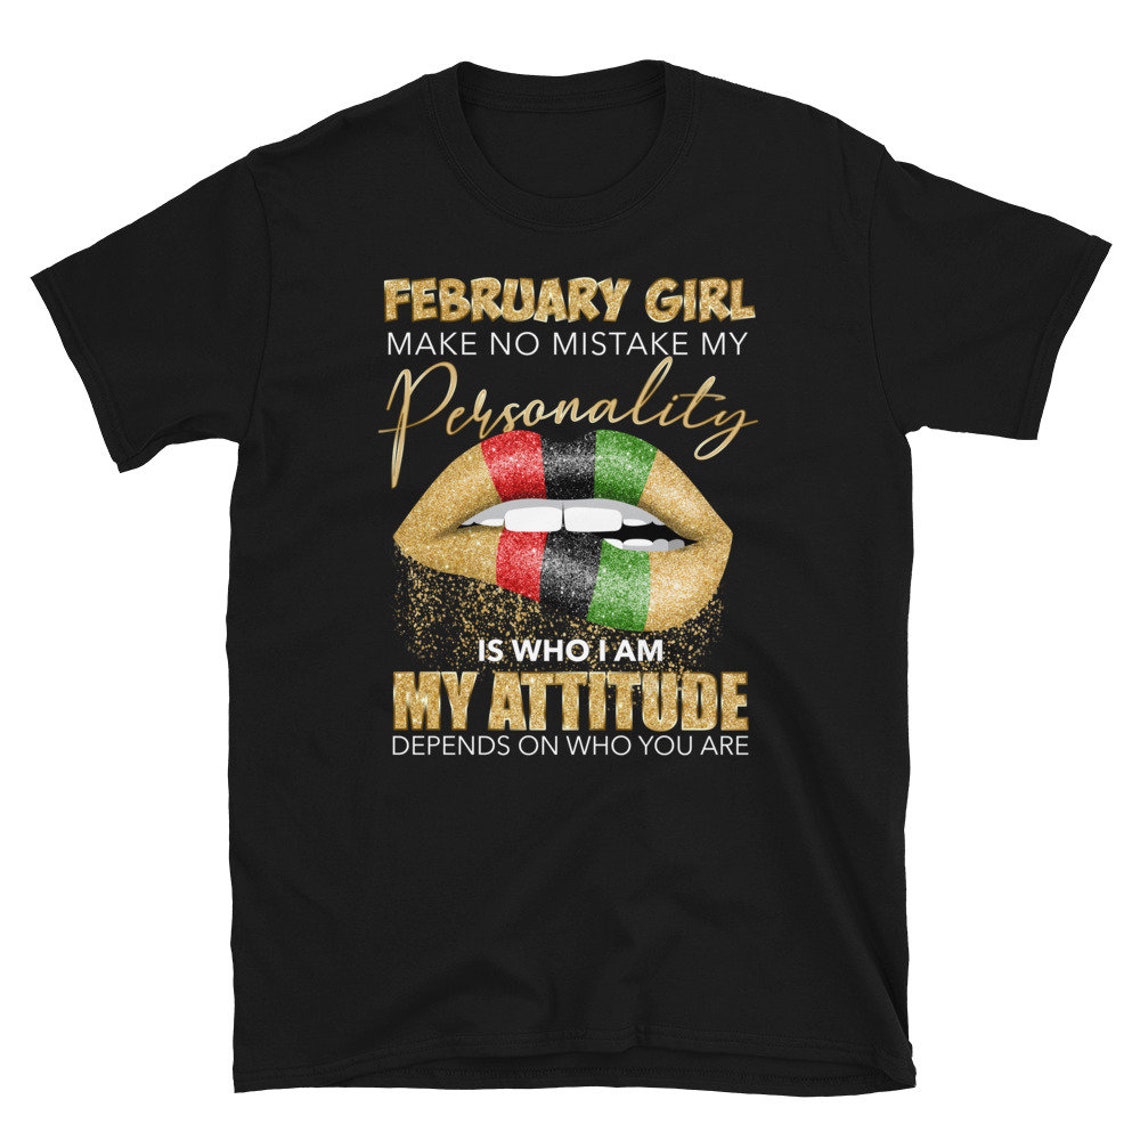 February Girl Shirt with African Lips, February Queen